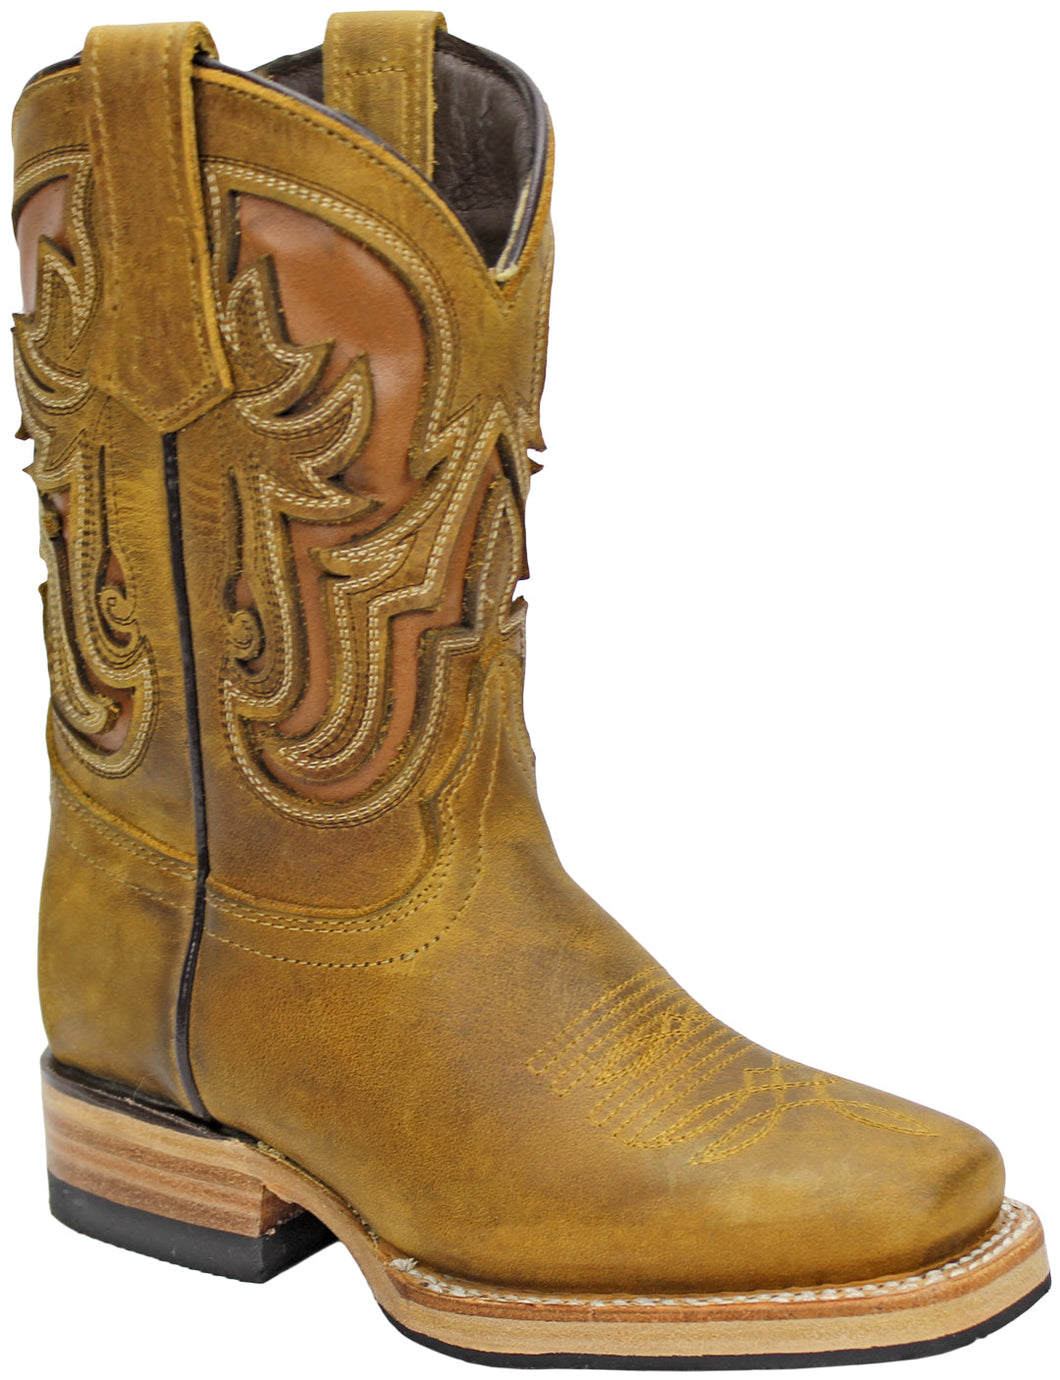 Silverton Kids Ranch All Leather Square Toe Boots (Honey)